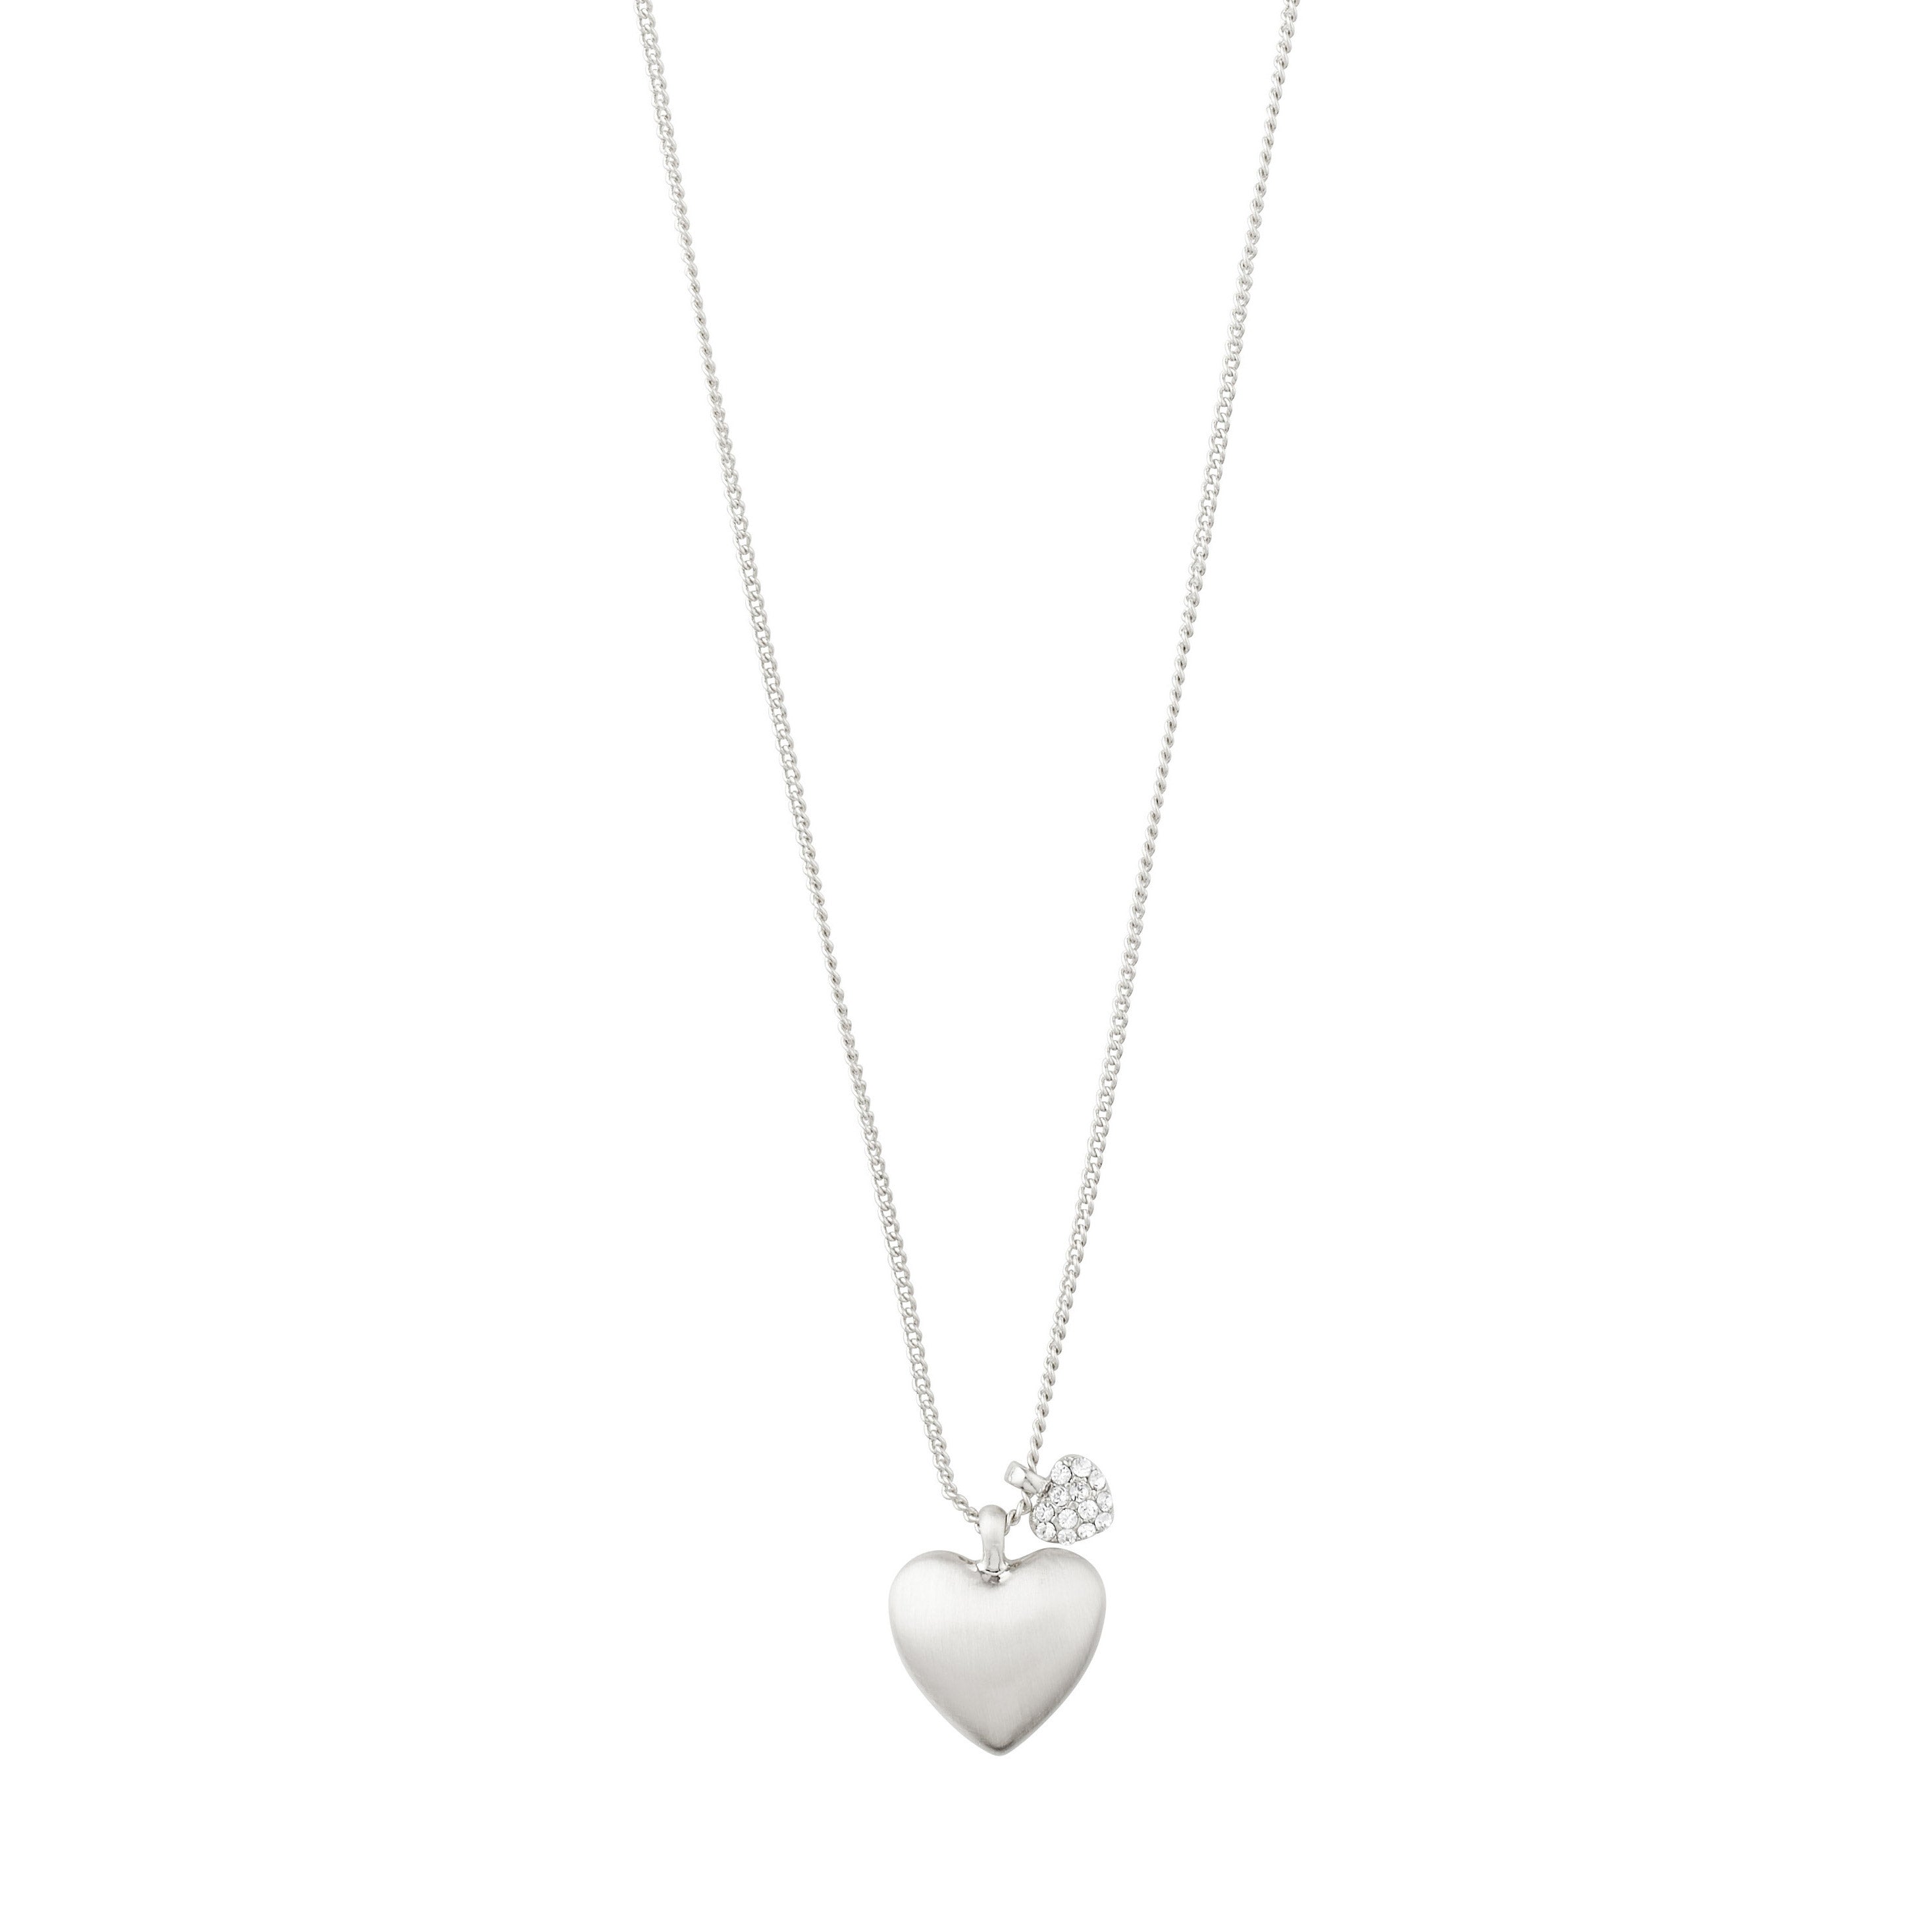 SOPHIA recycled heart pendant necklace silver-plated – Pilgrim